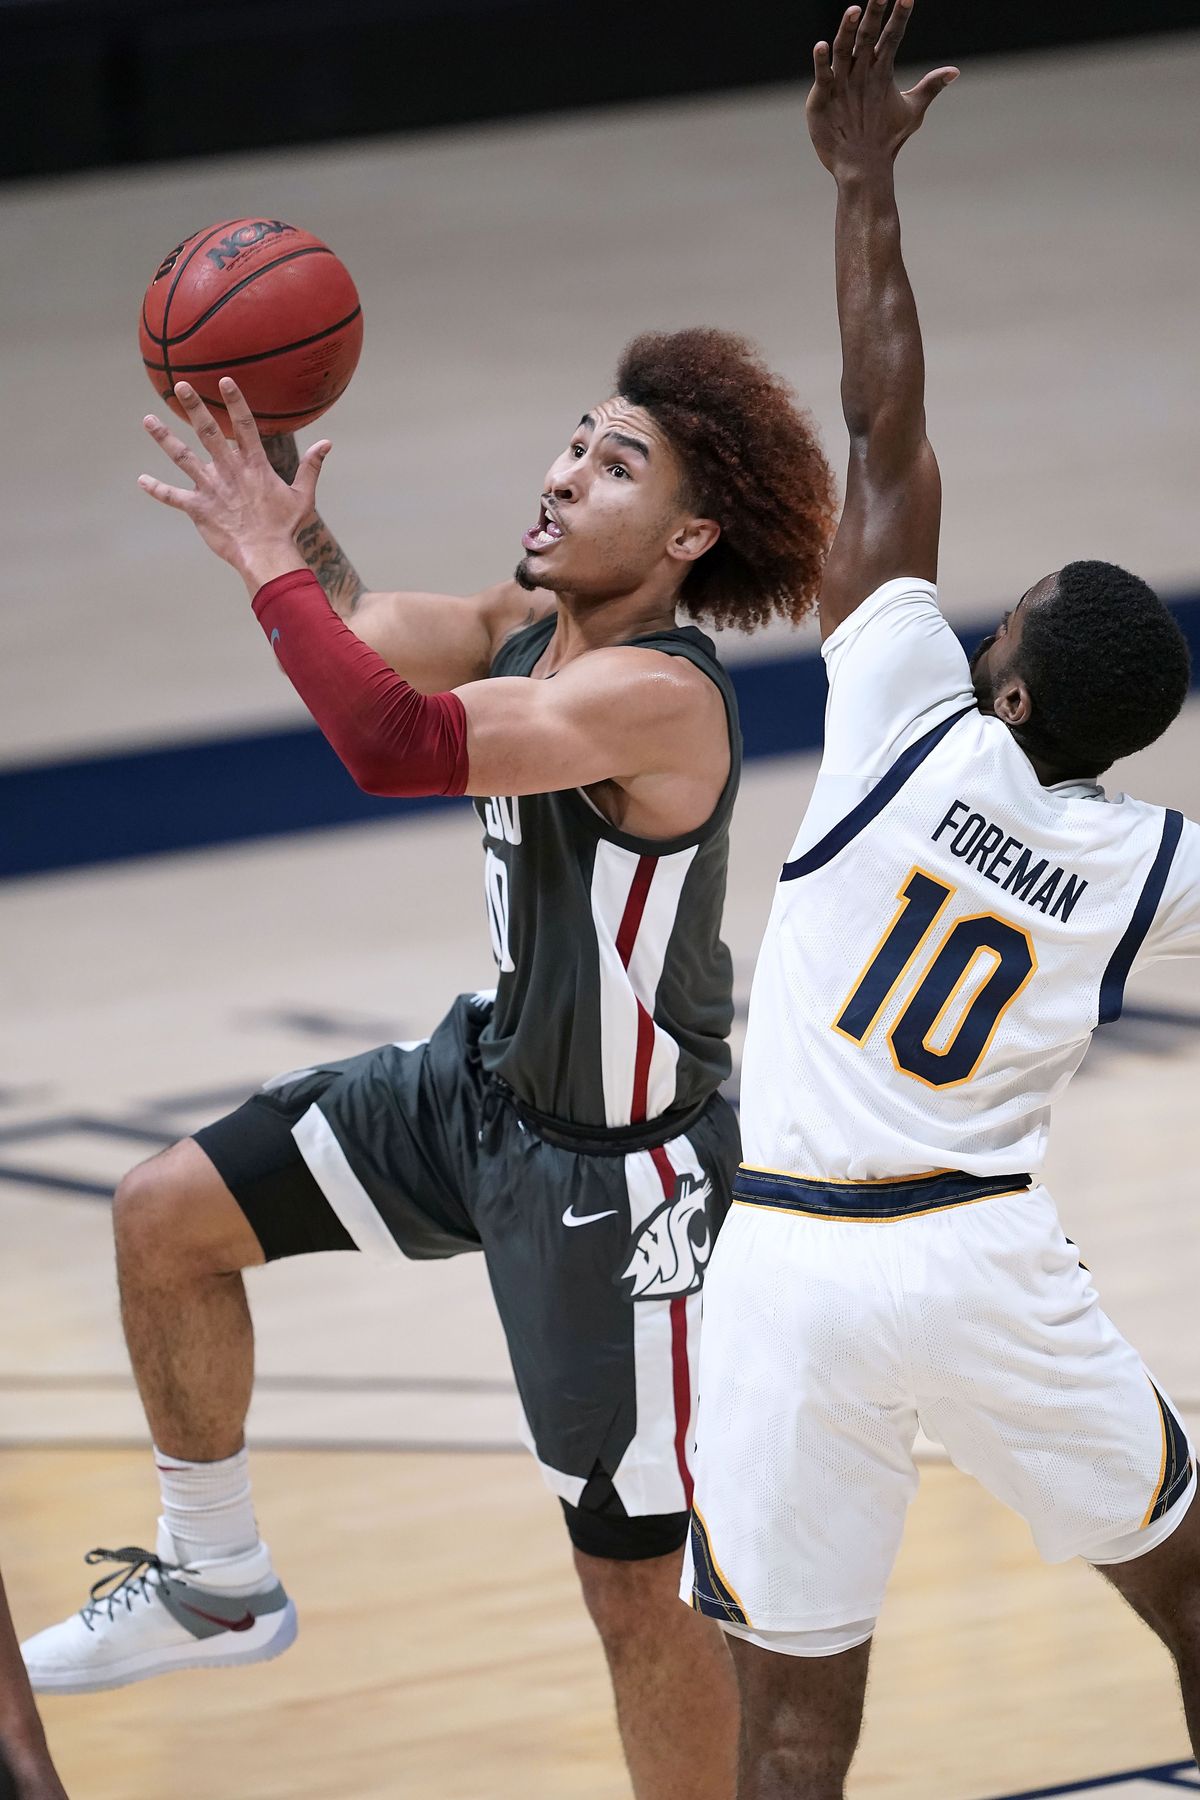 Washington State guard Isaac Bonton, left, drives to the basket against California guard Makale Foreman, right, during the first half of an NCAA college basketball game, Thursday, Jan. 7, 2021, in Berkeley, Calif.   (Associated Press)